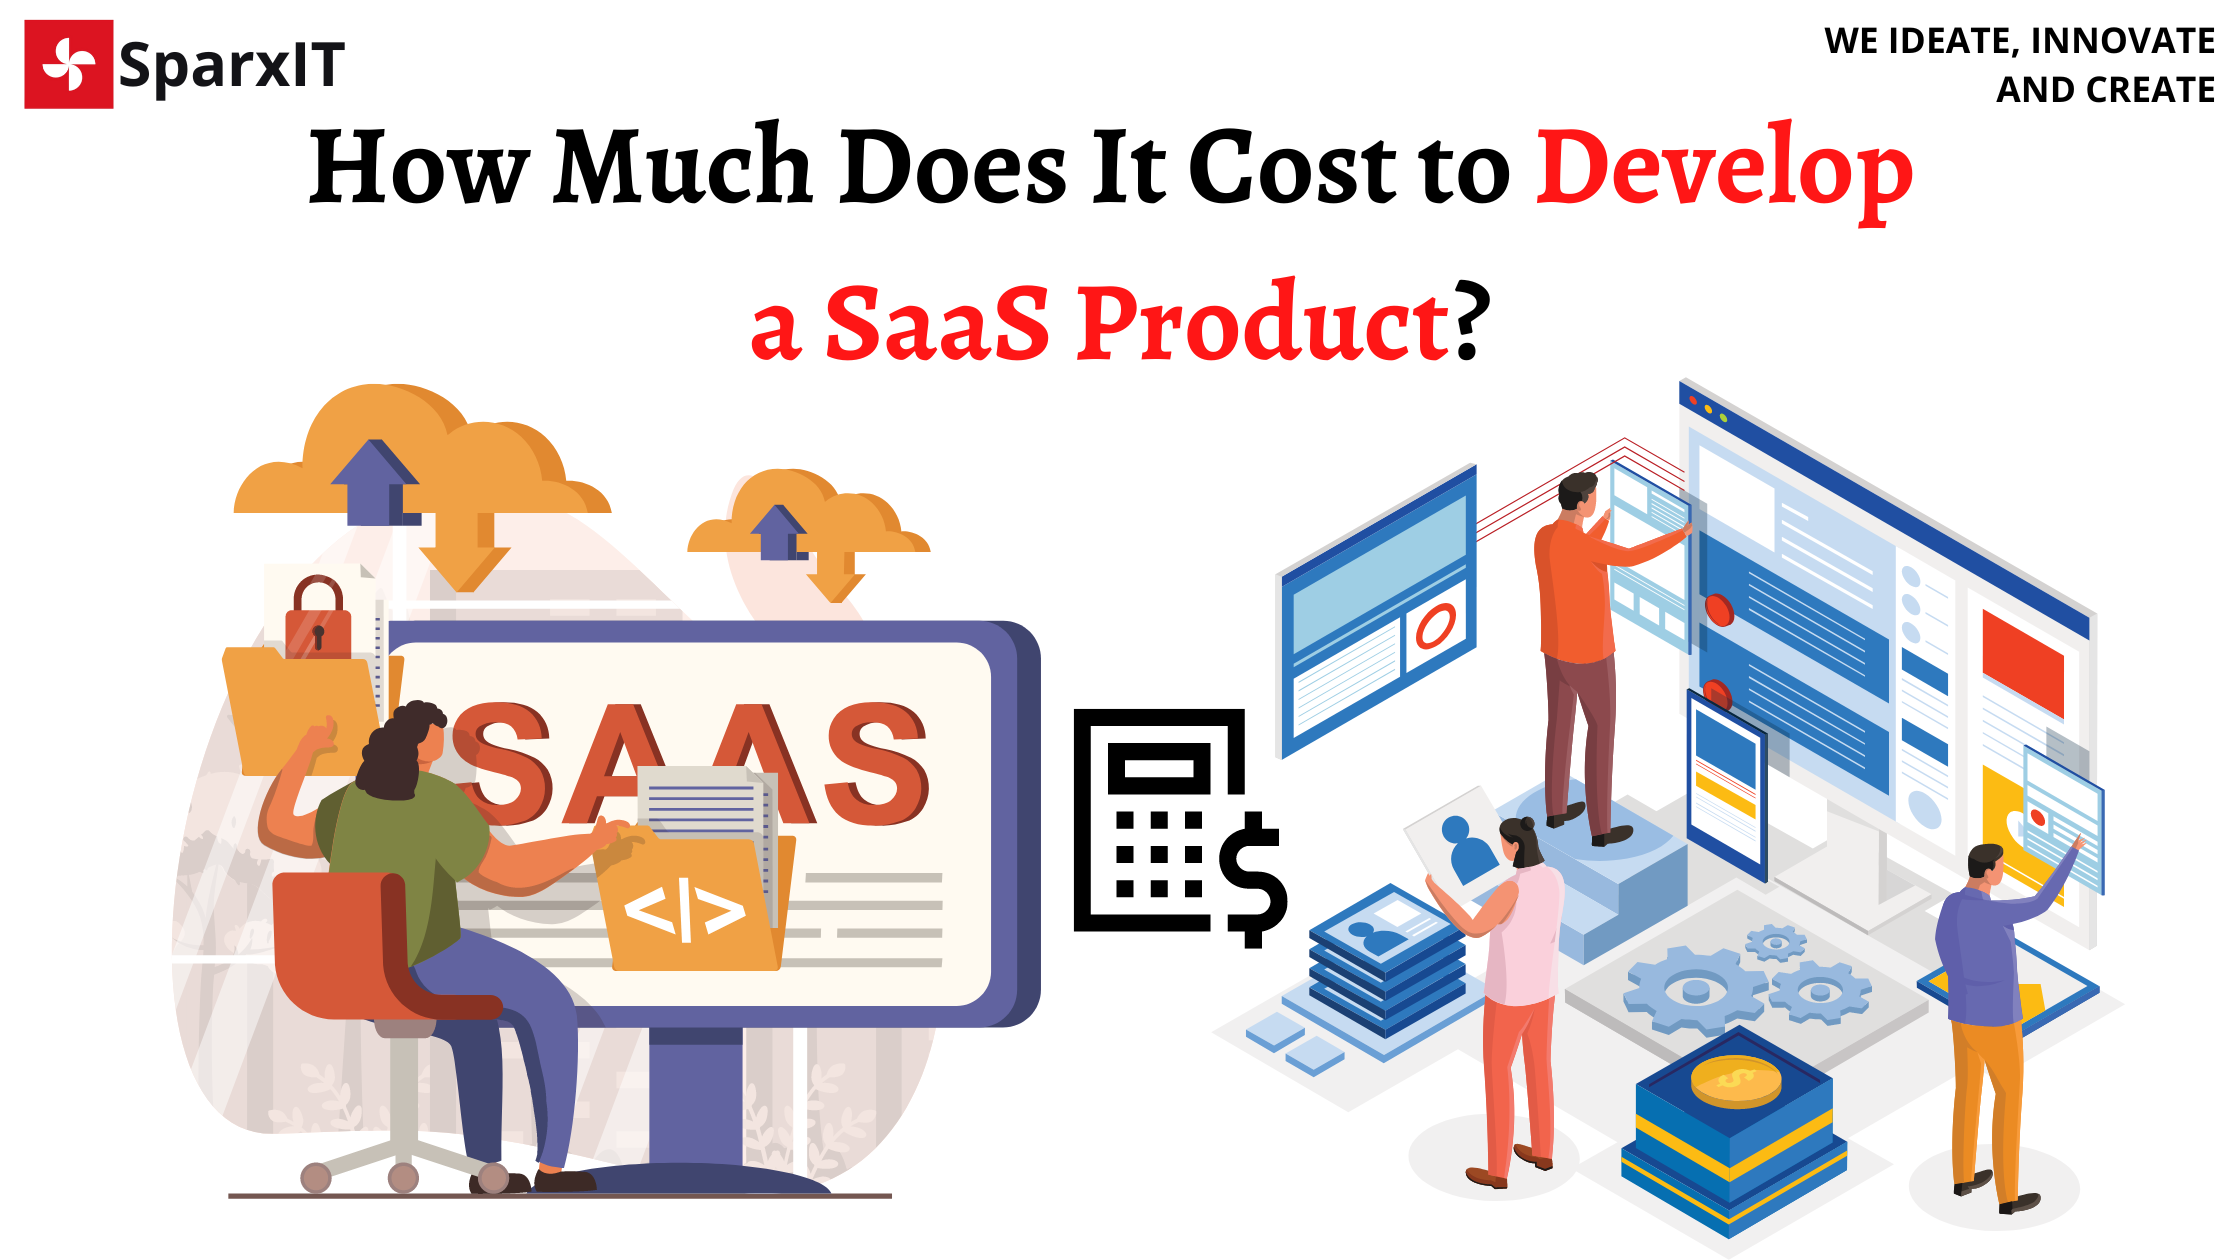 How Much Does It Cost to Develop a SaaS Product?